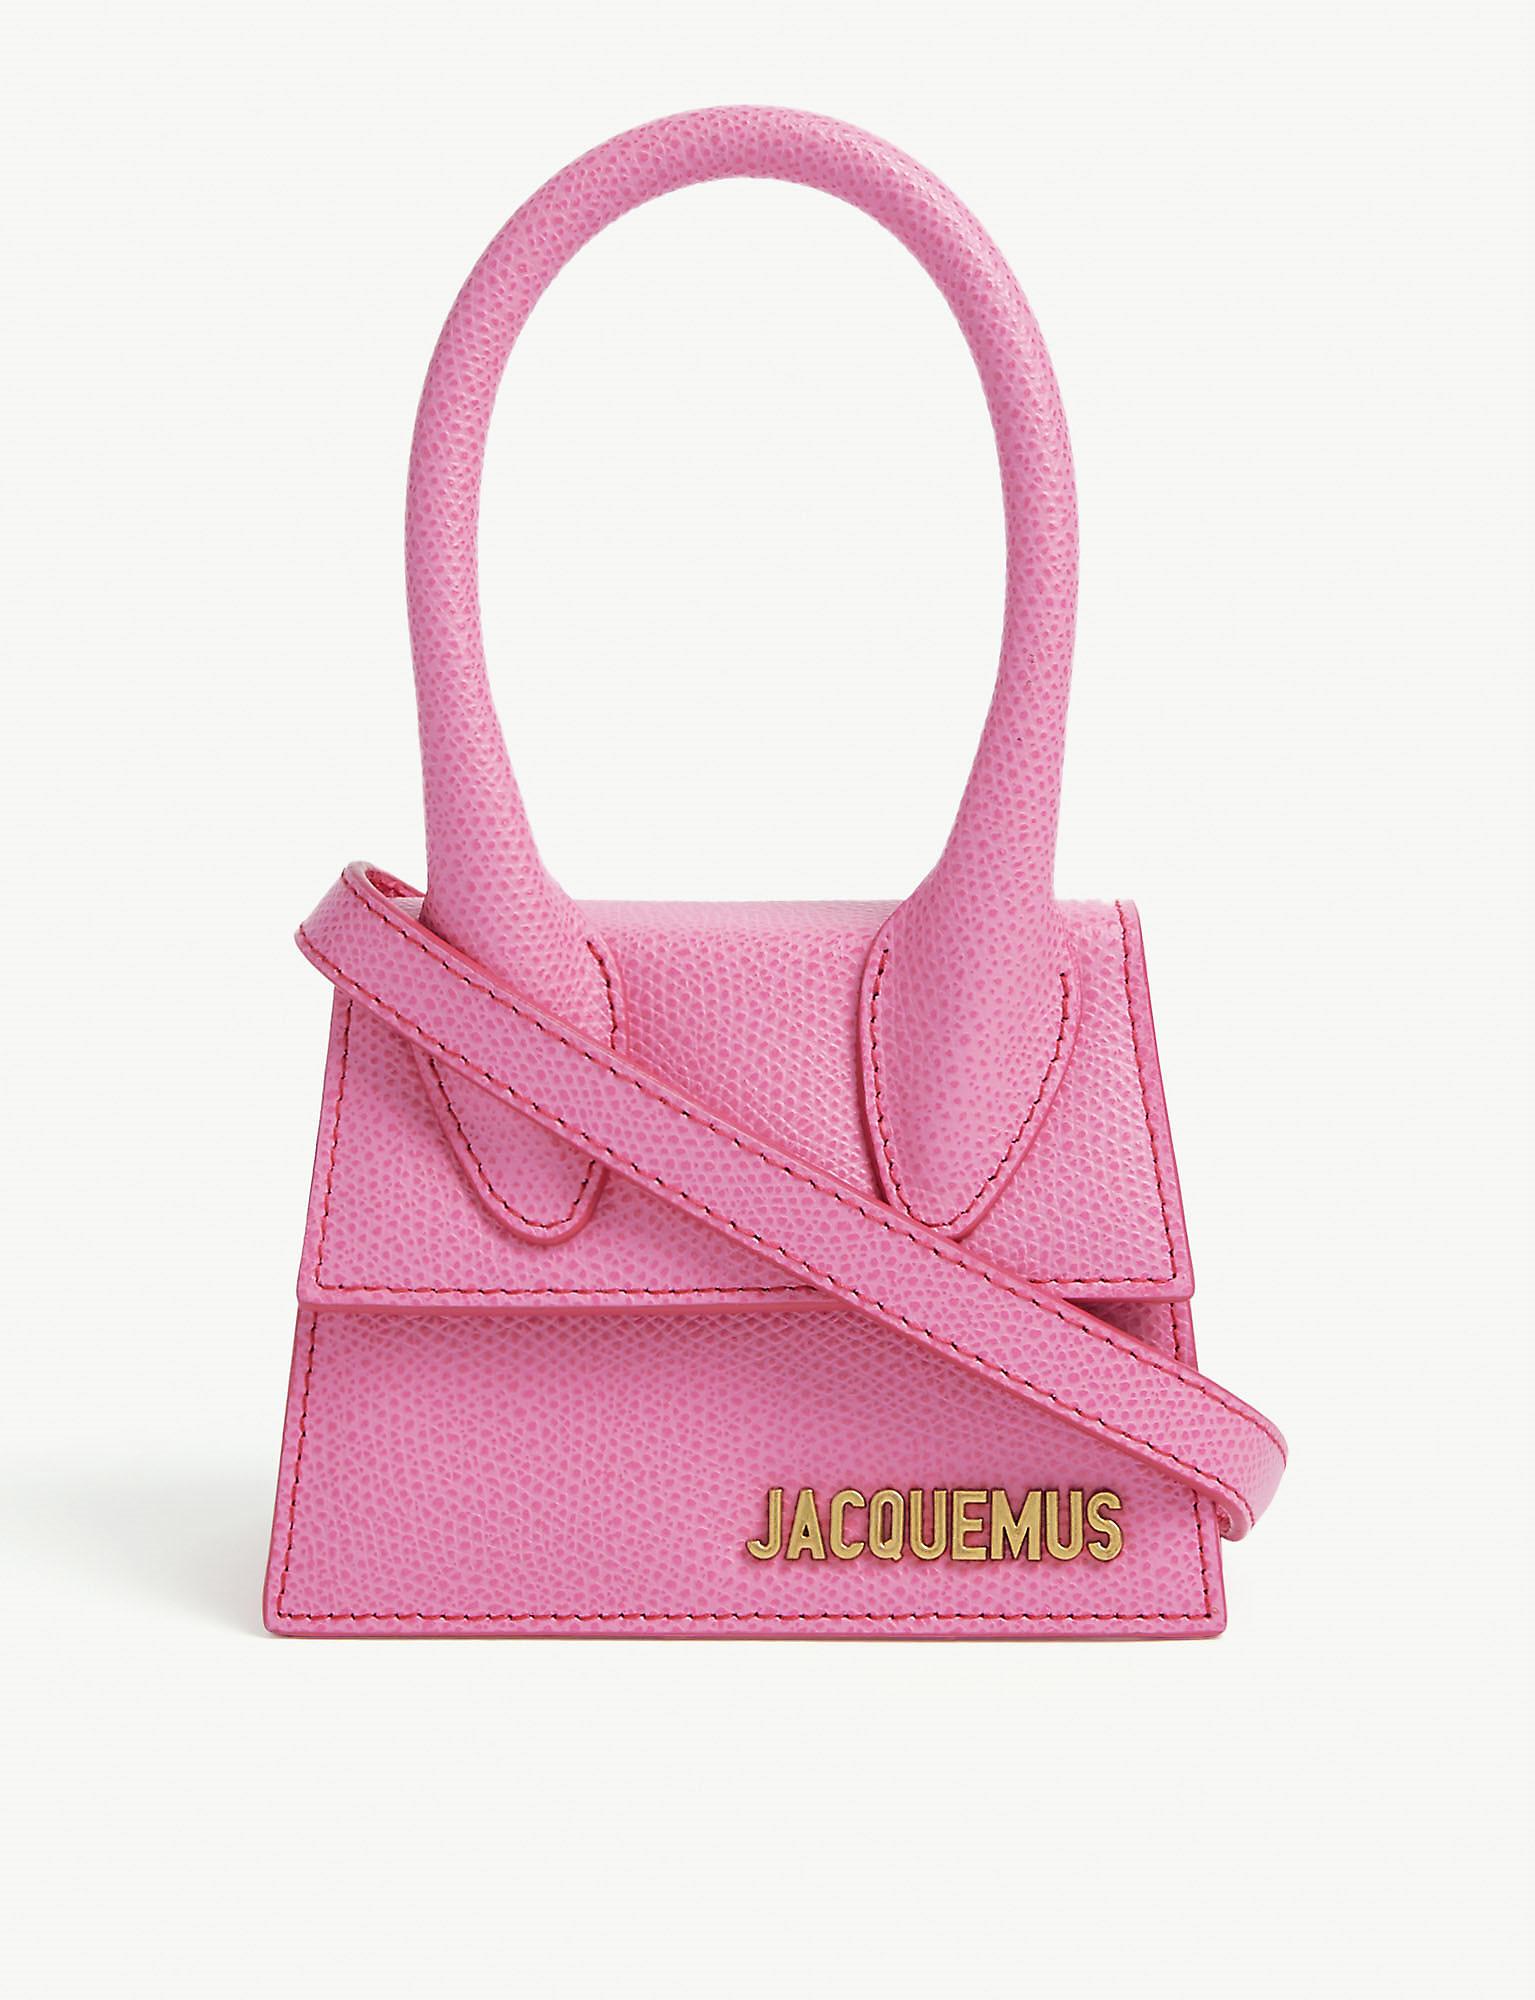 Jacquemus Le Chiquito Hand Bag in Pink - Lyst